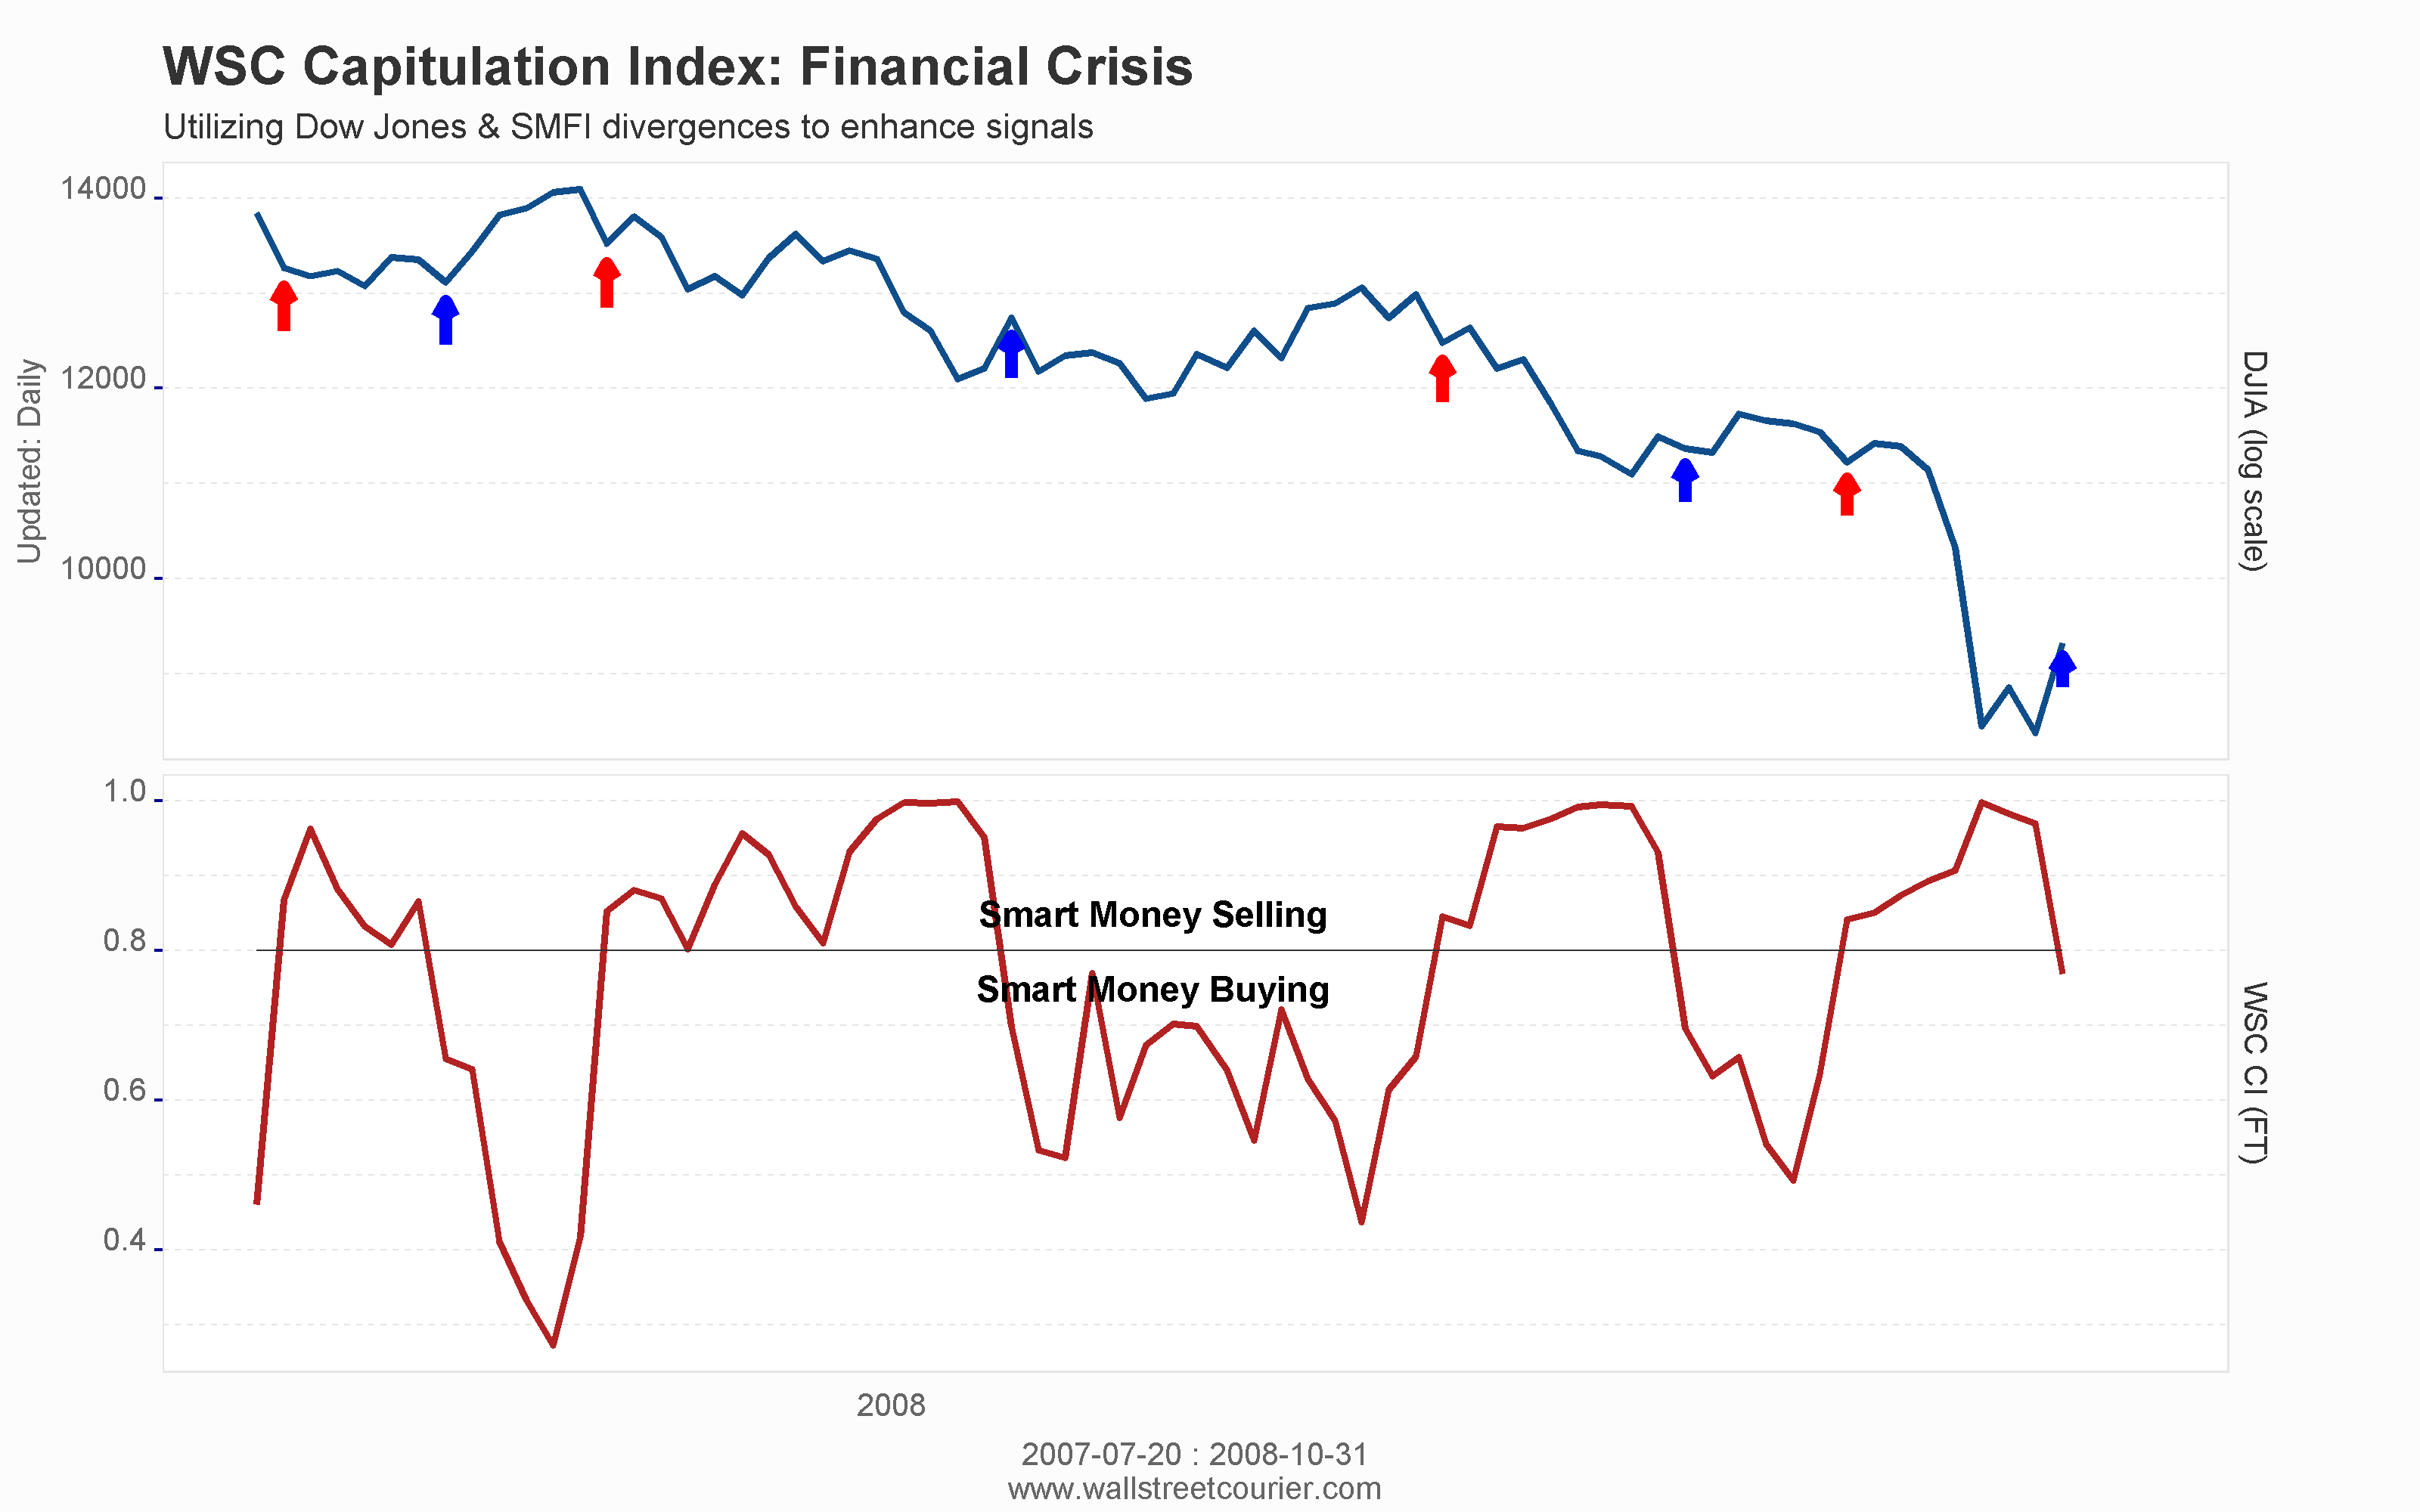 Chart showing the performance of the WSC Capitulation Index, an indicator that improves the accuracy of the Smart Money Flow Index by using a mathematical adjustment to derive additional buy and sell signals based on strong divergences between the Dow Jones and the SMFI